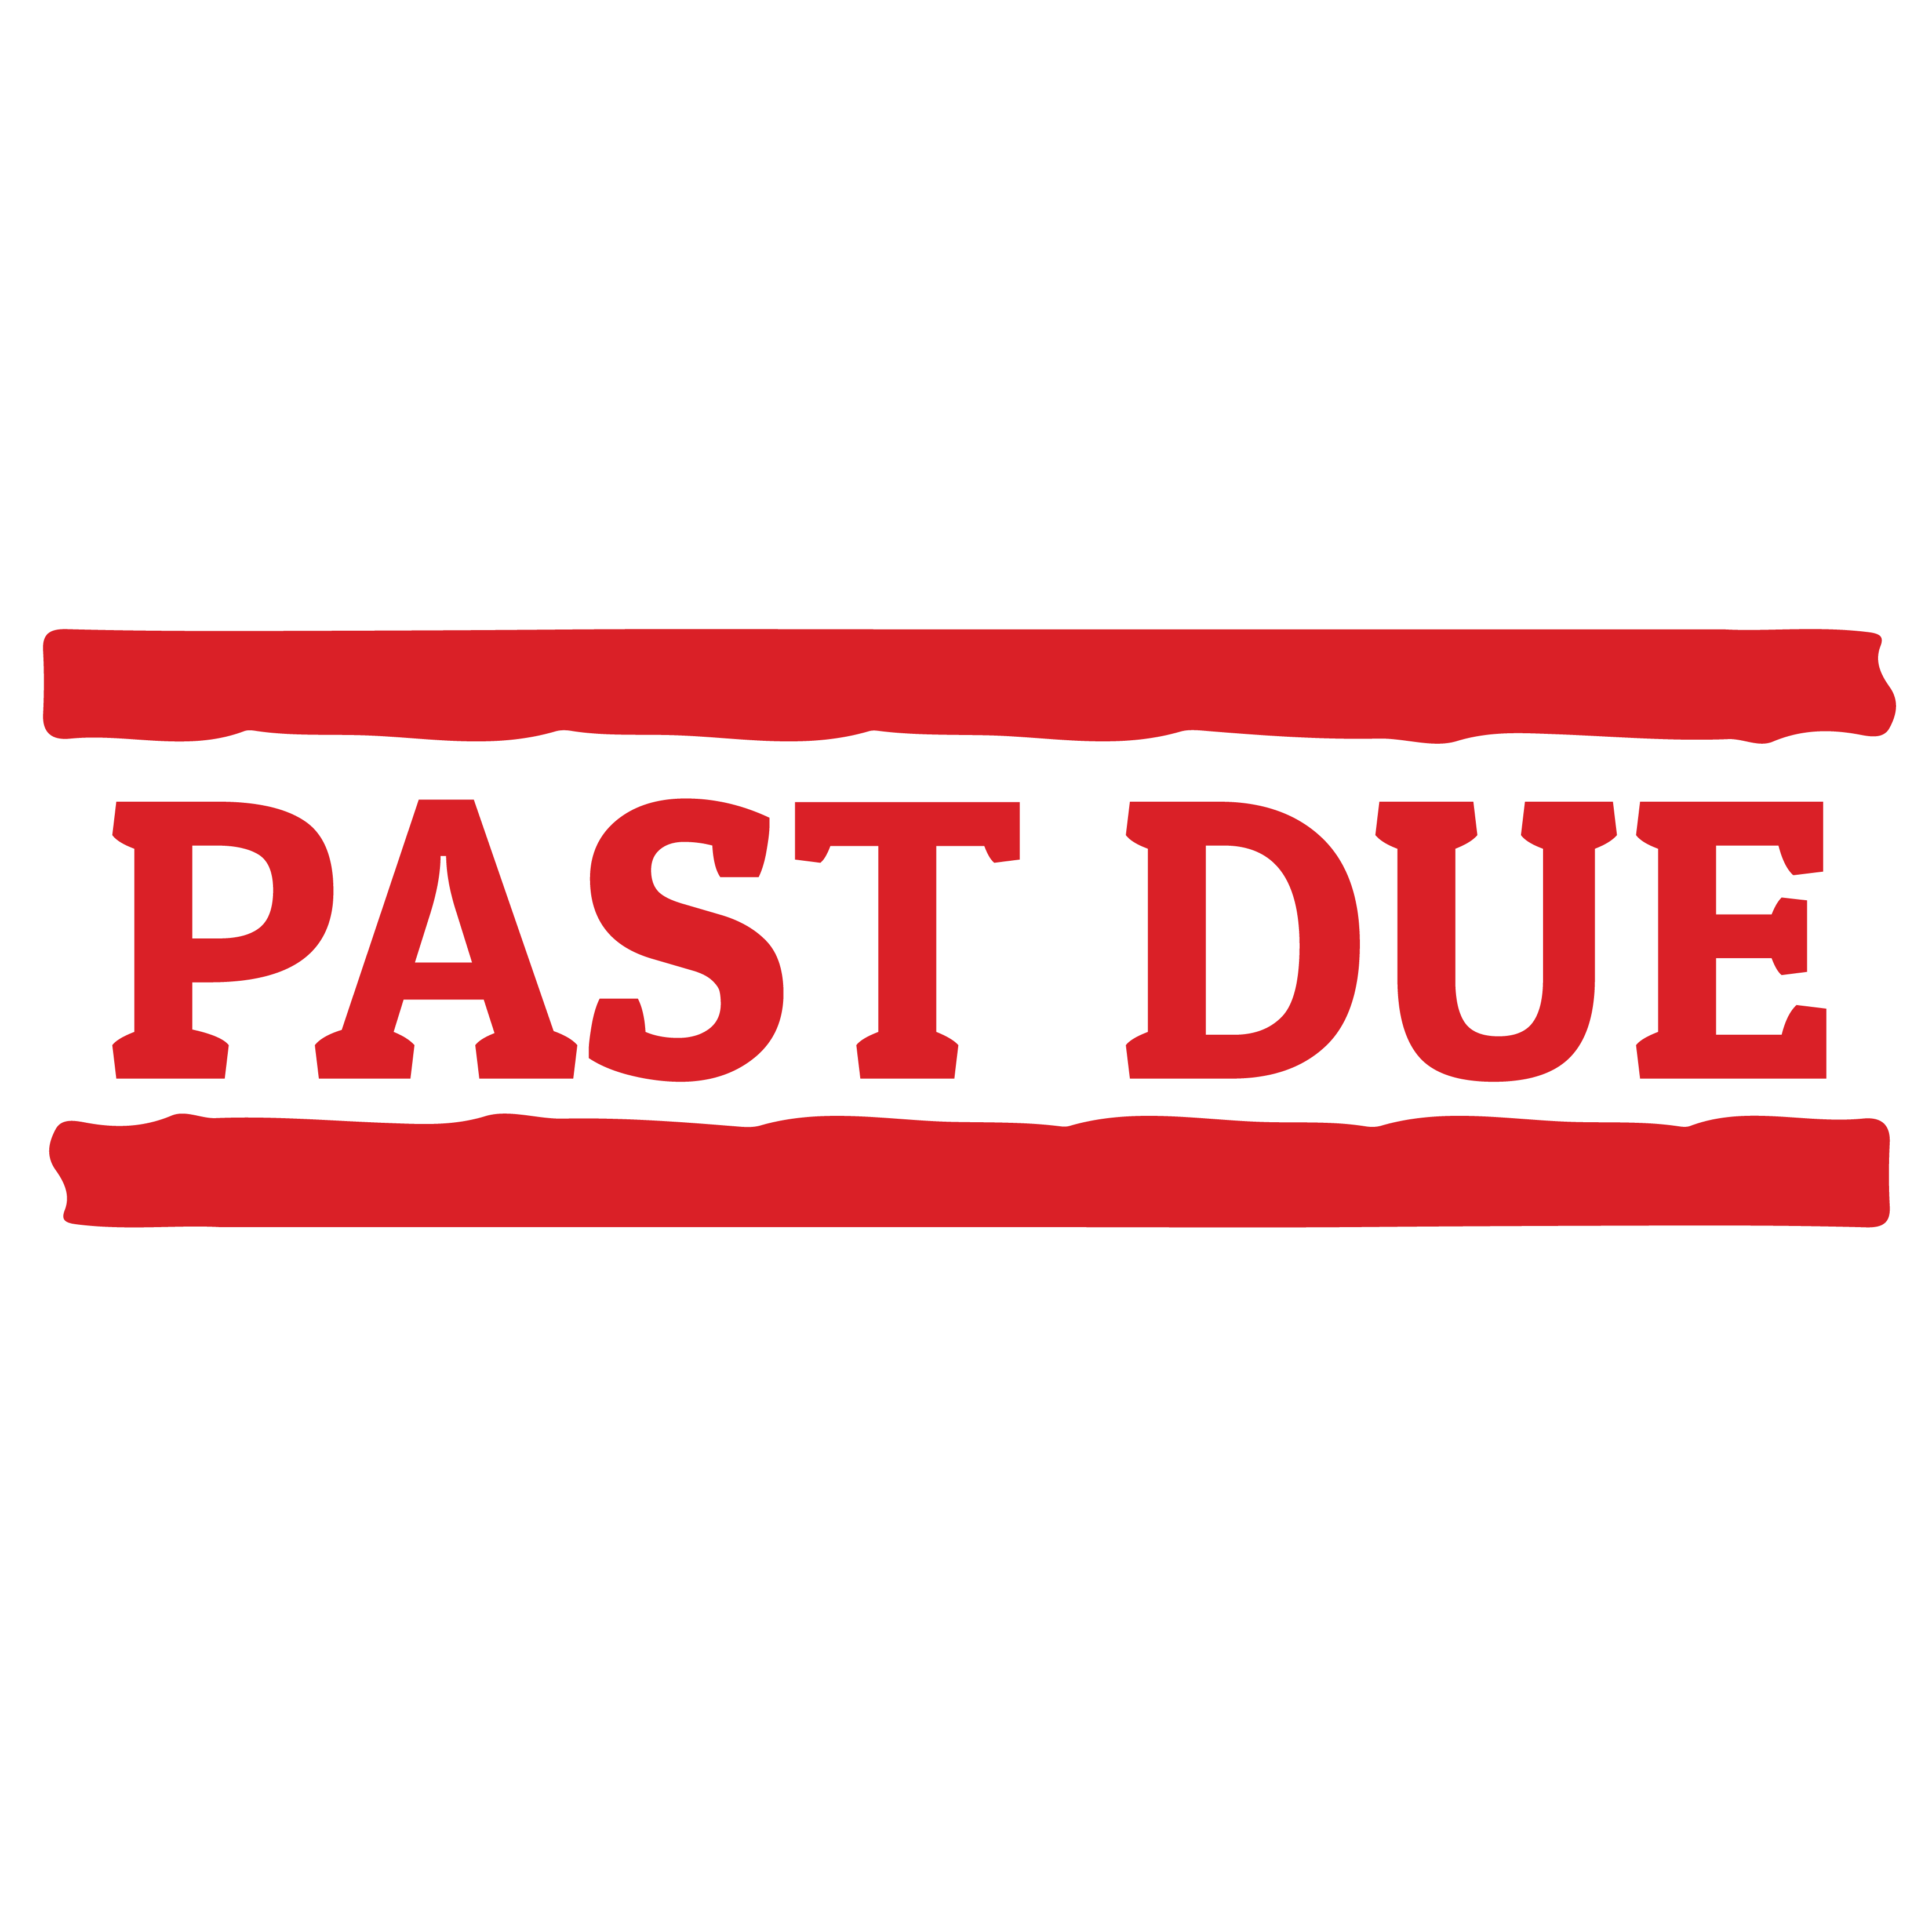 Past Due Please Remit with Calendar Large Hand Stamp